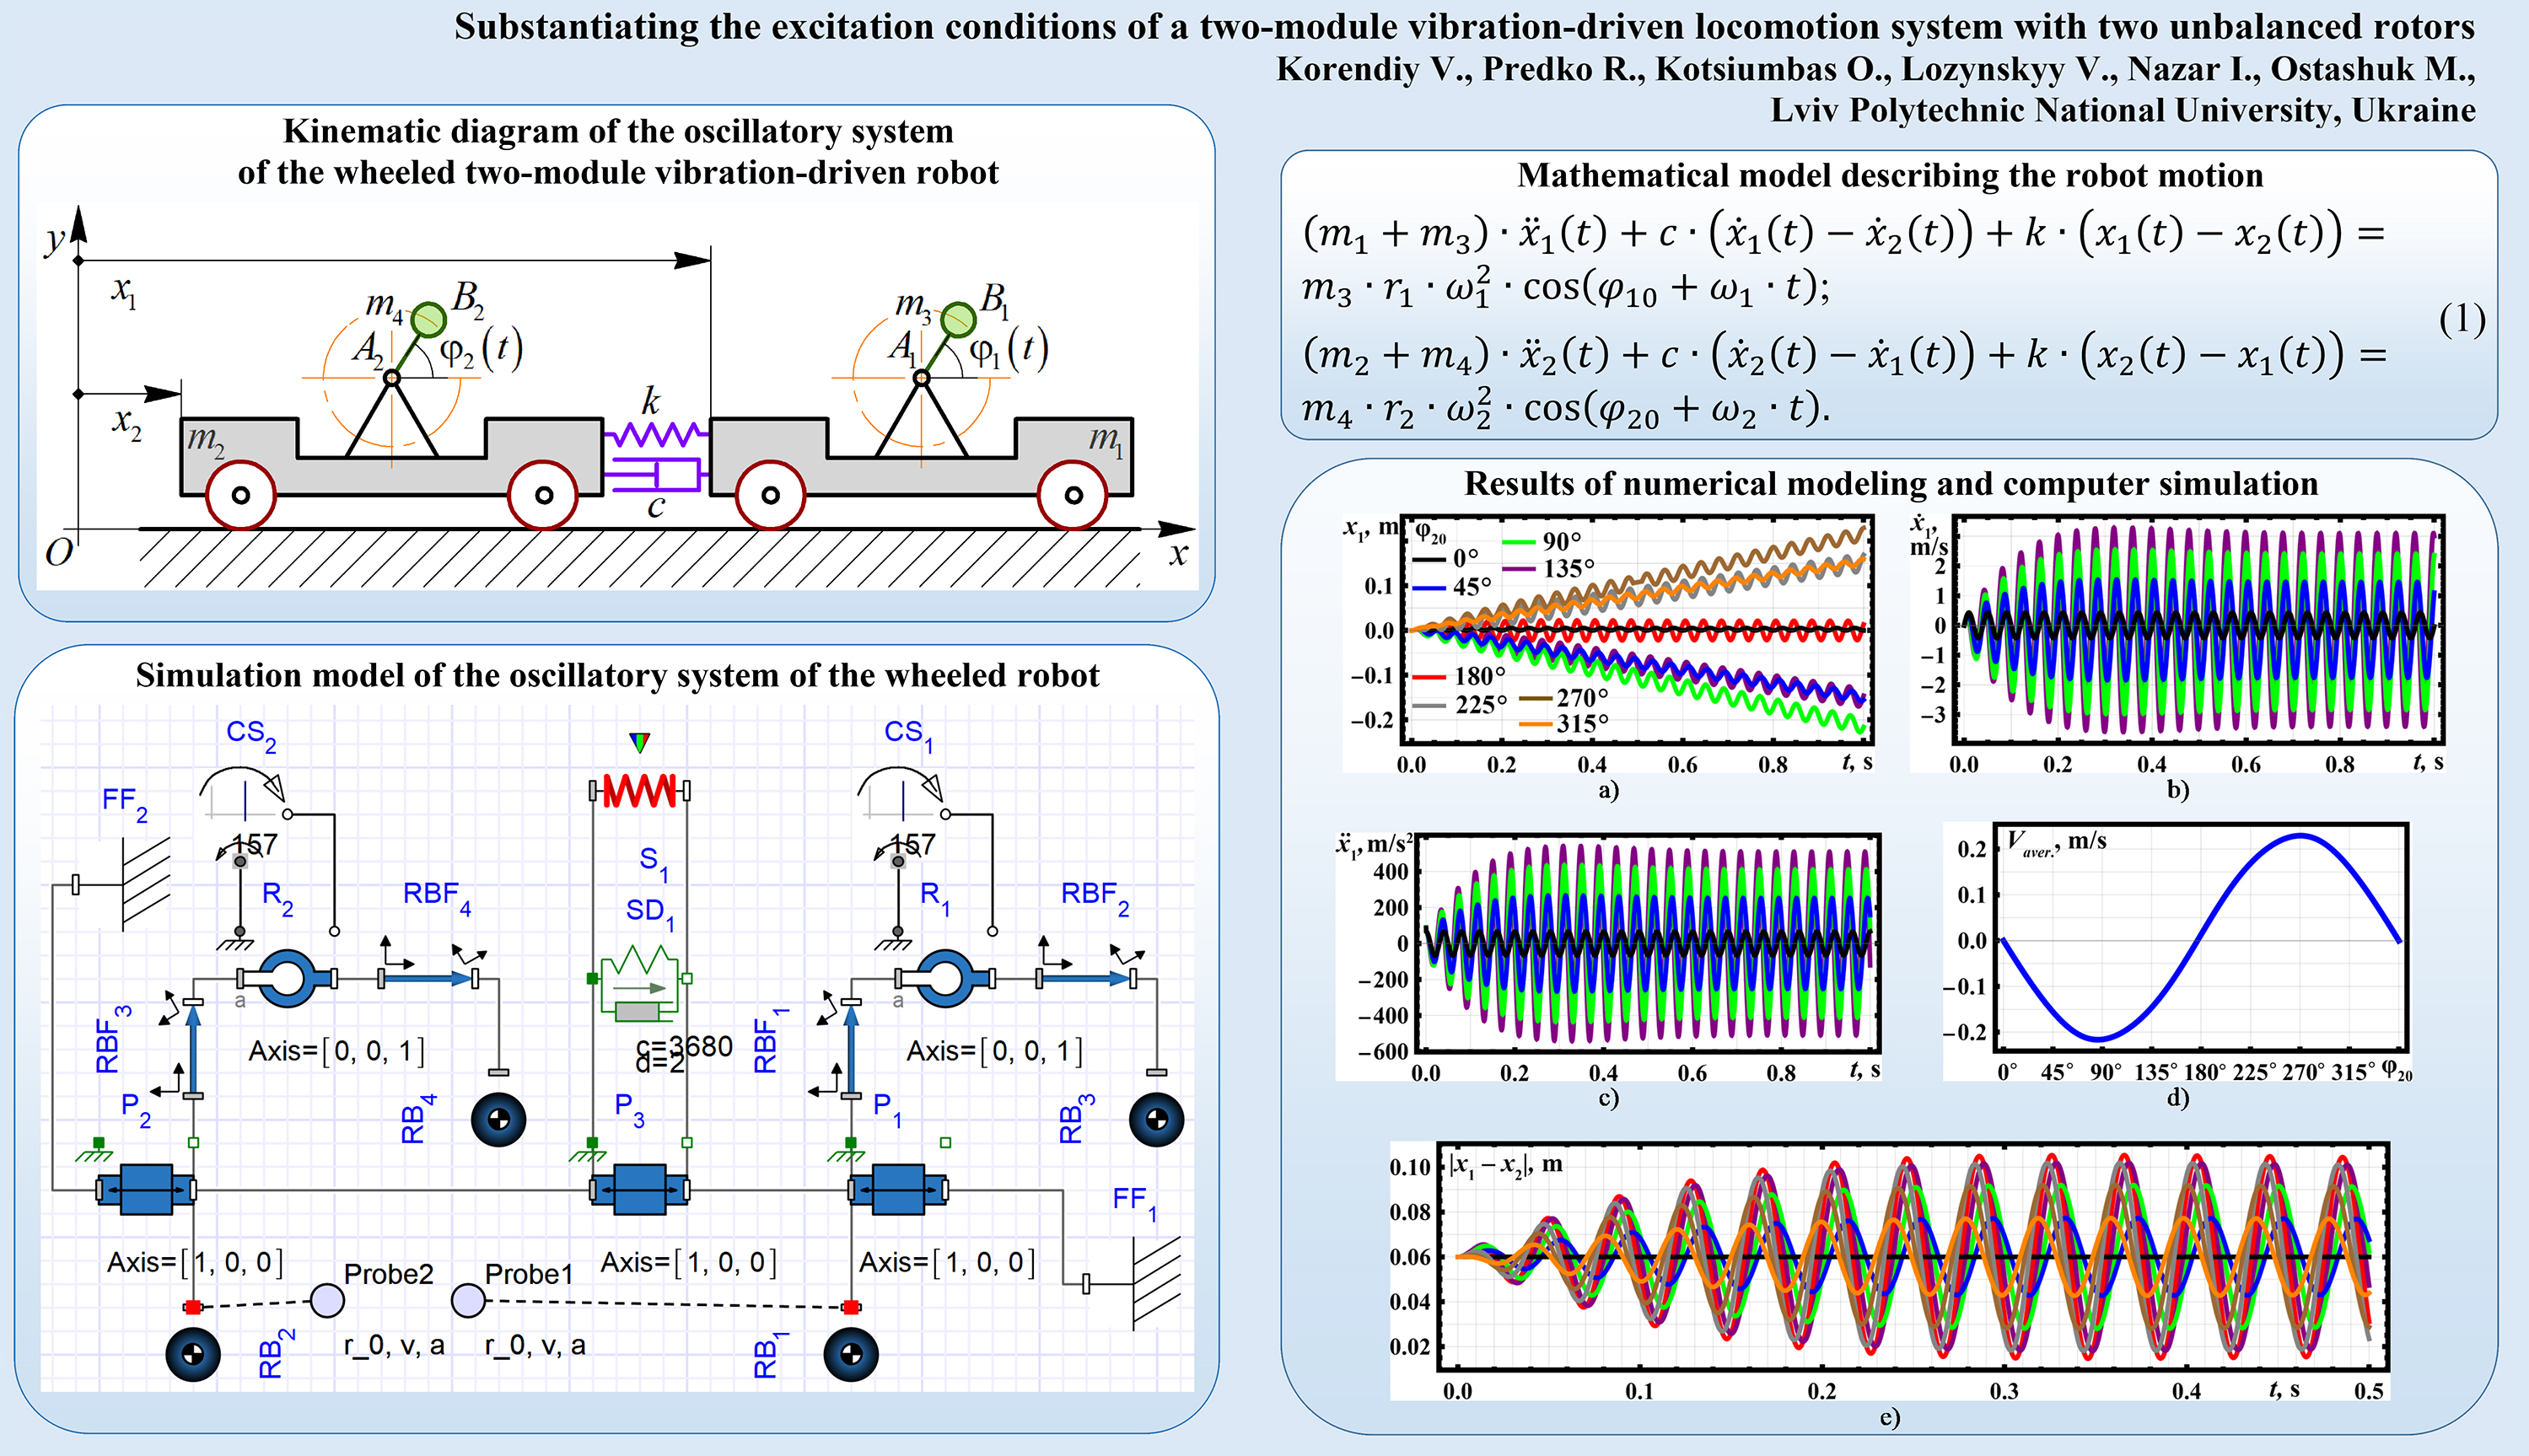 Substantiating the excitation conditions of a two-module vibration-driven locomotion system with two unbalanced rotors